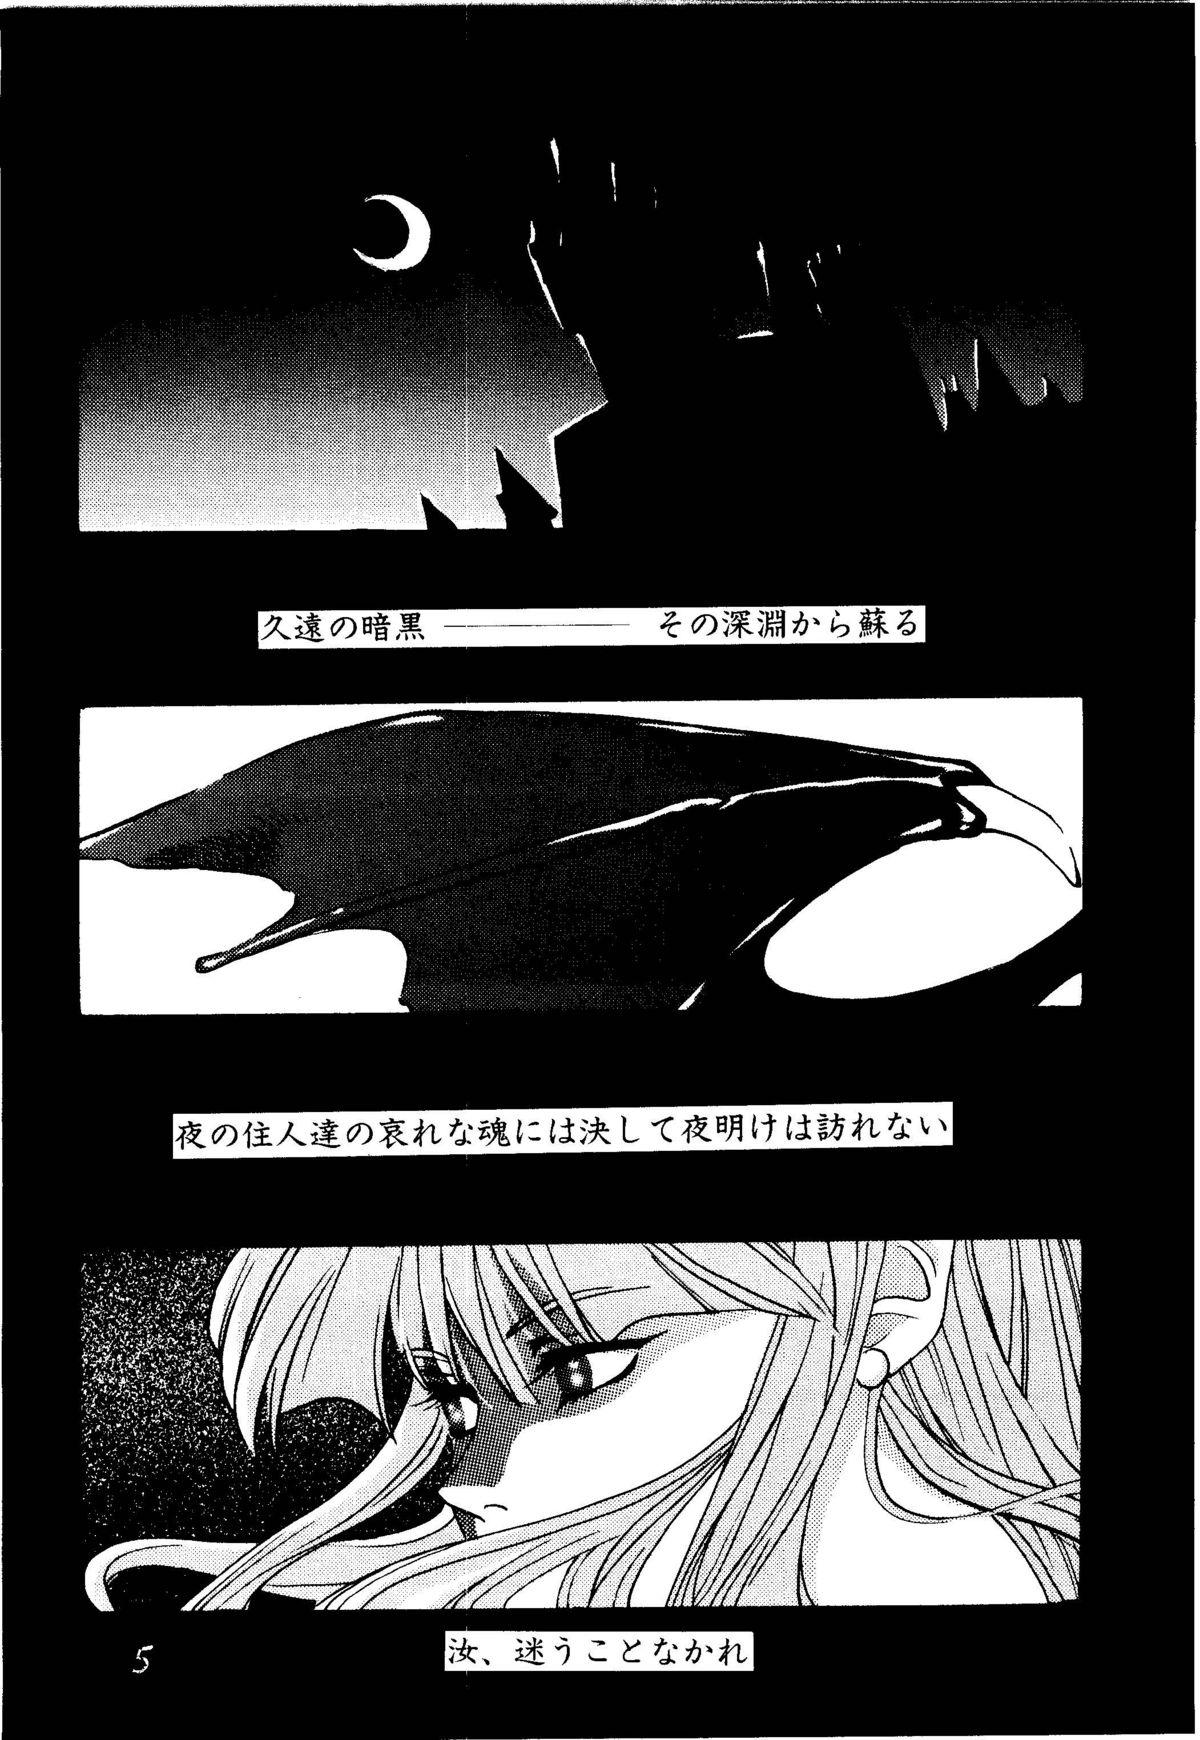 Blowjob Fire and Ice - Darkstalkers Taboo - Page 5